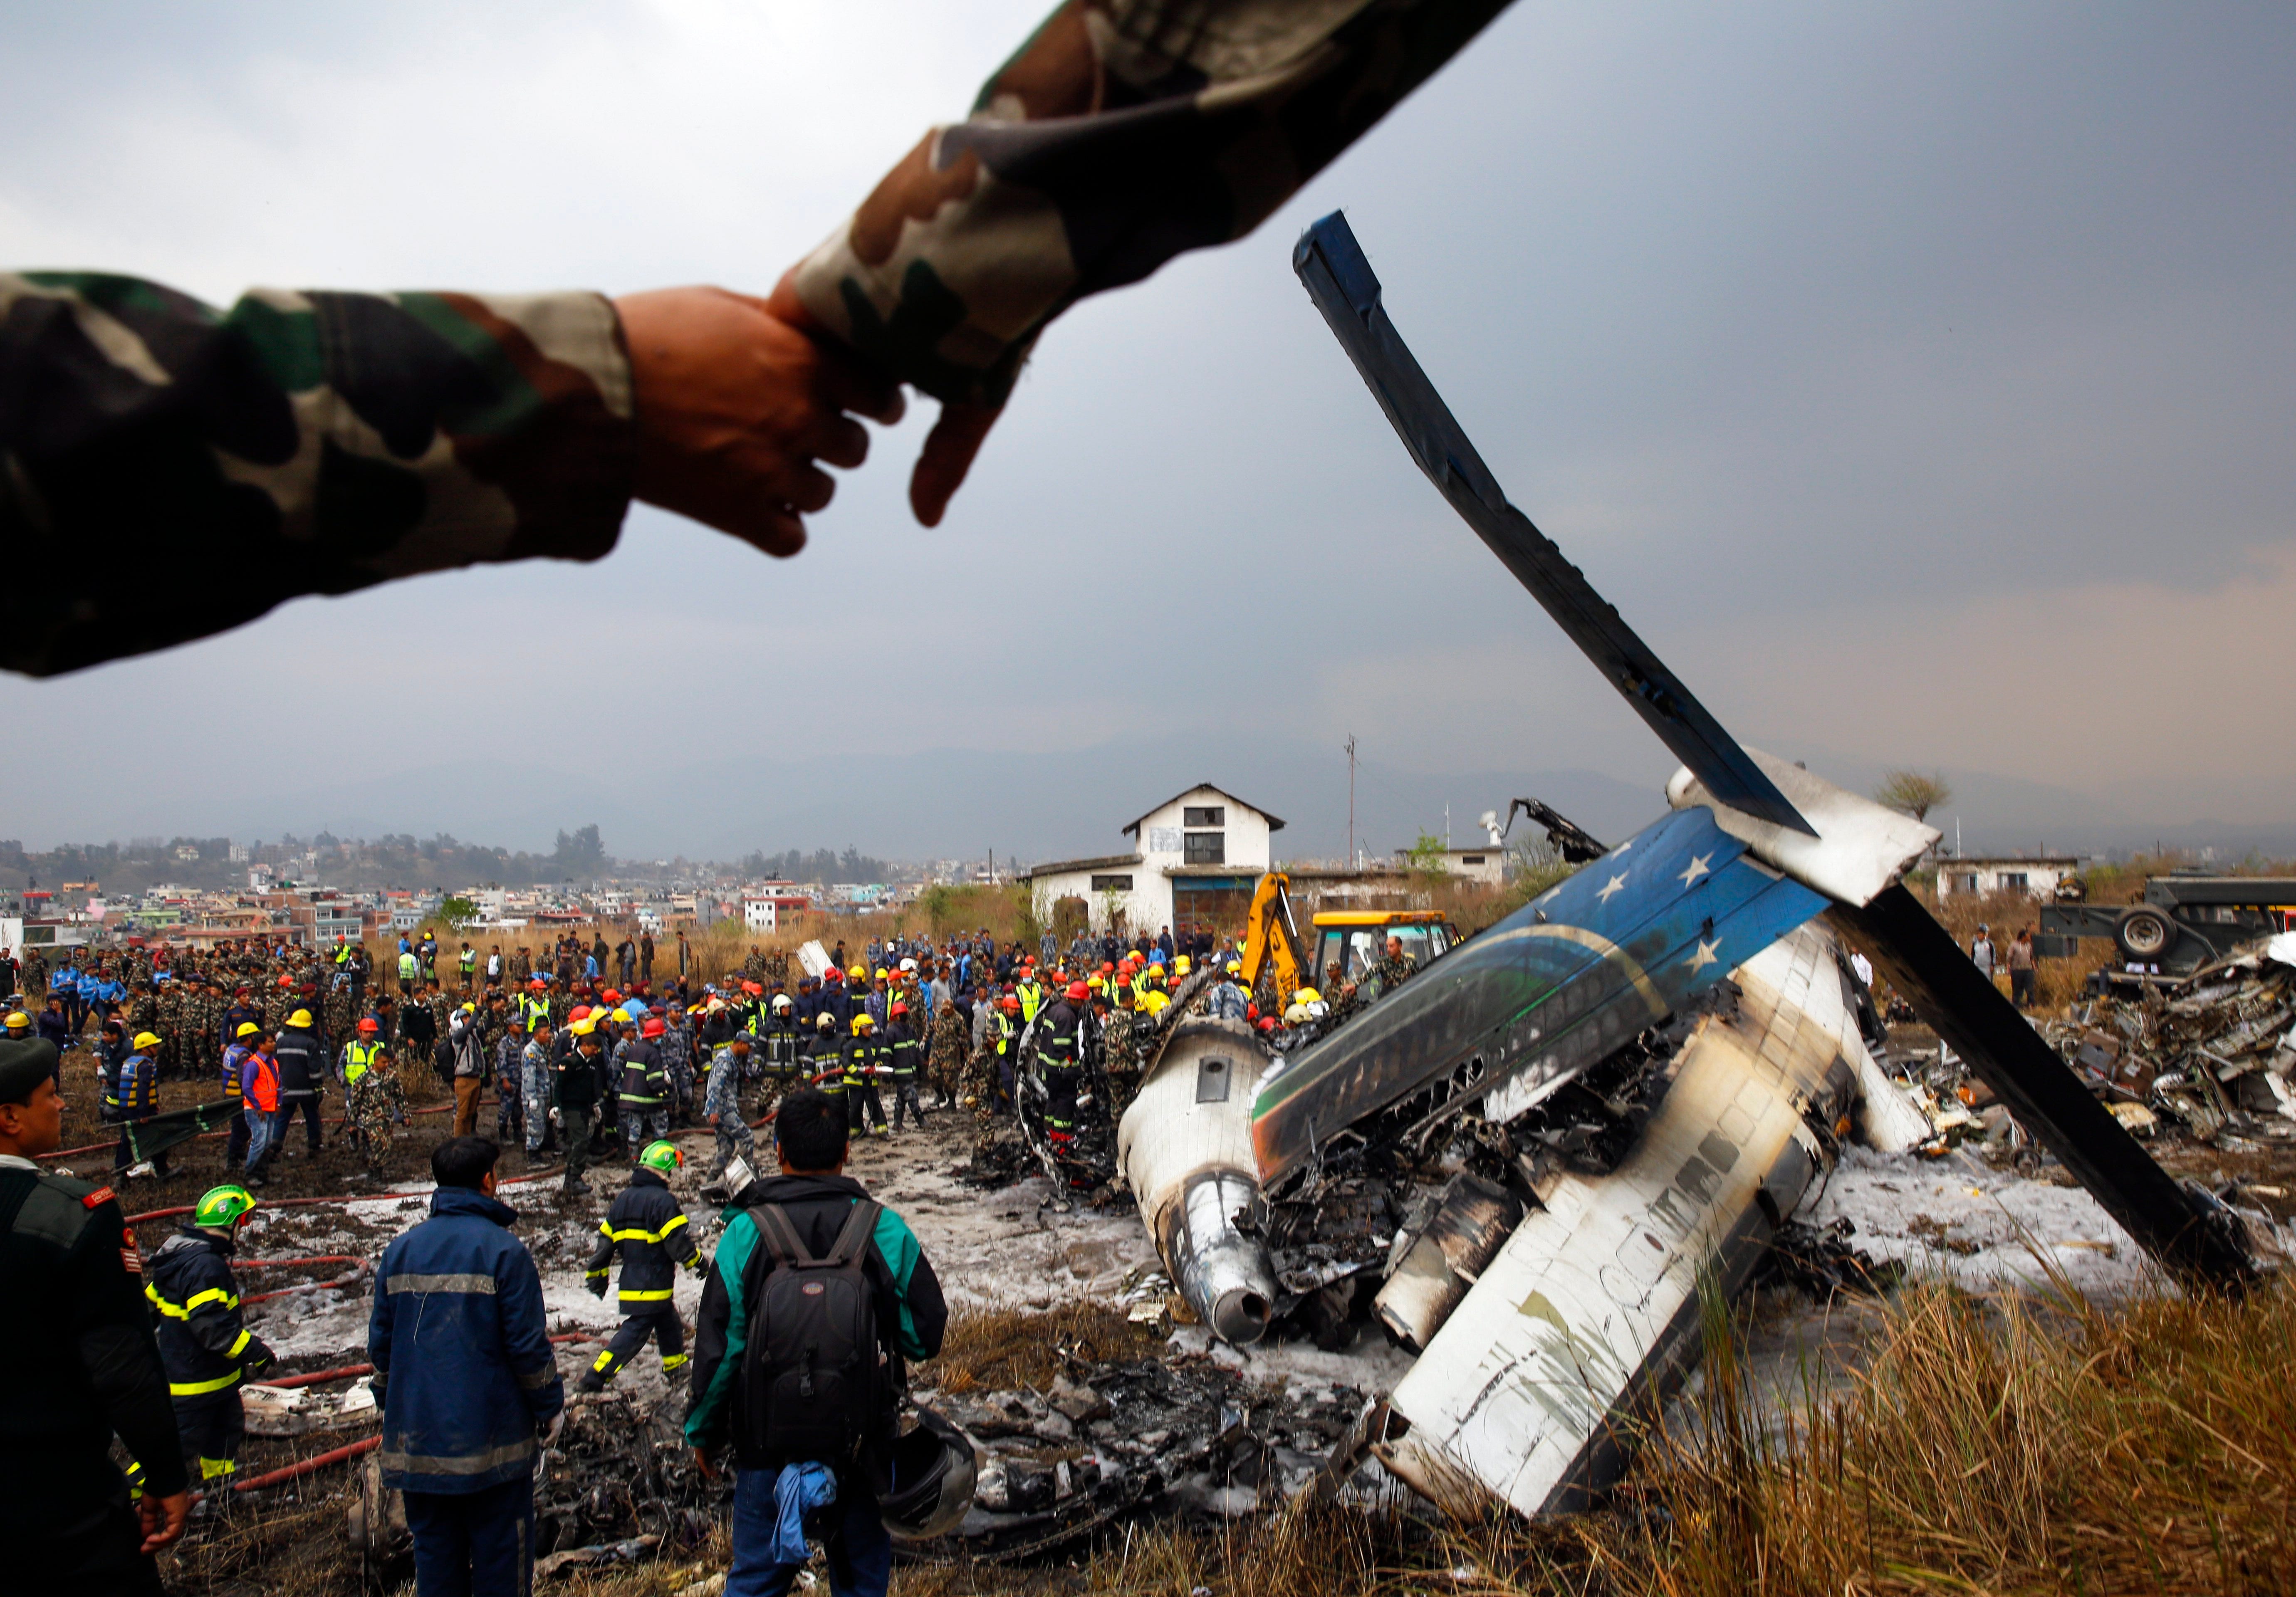 Rescue teams gather next to the wreckage of a plane that crashed at the main airport Tribhuvan International Airport in Kathmandu, Nepal. According to reports the plane crashed while landing and had 71 passengers and crew on board and at least 38 peo